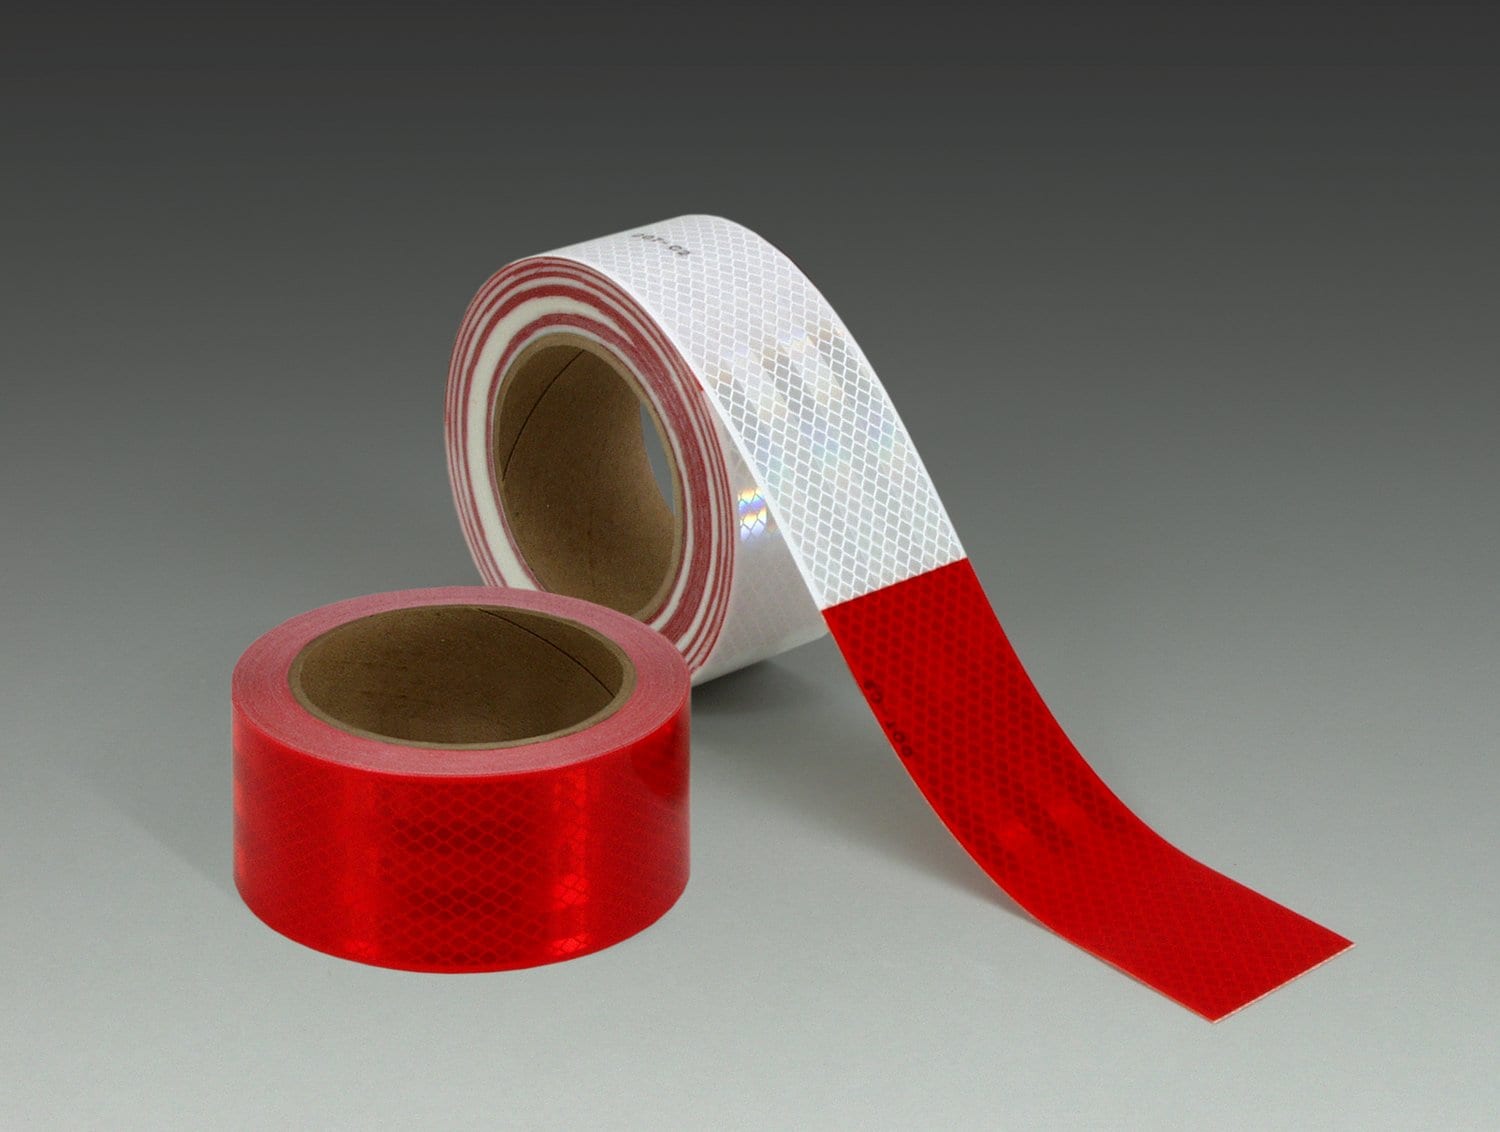 3M Removable Repositionable Tape 9425, Clear, 3 in x 72 yd, 5.8 Mil